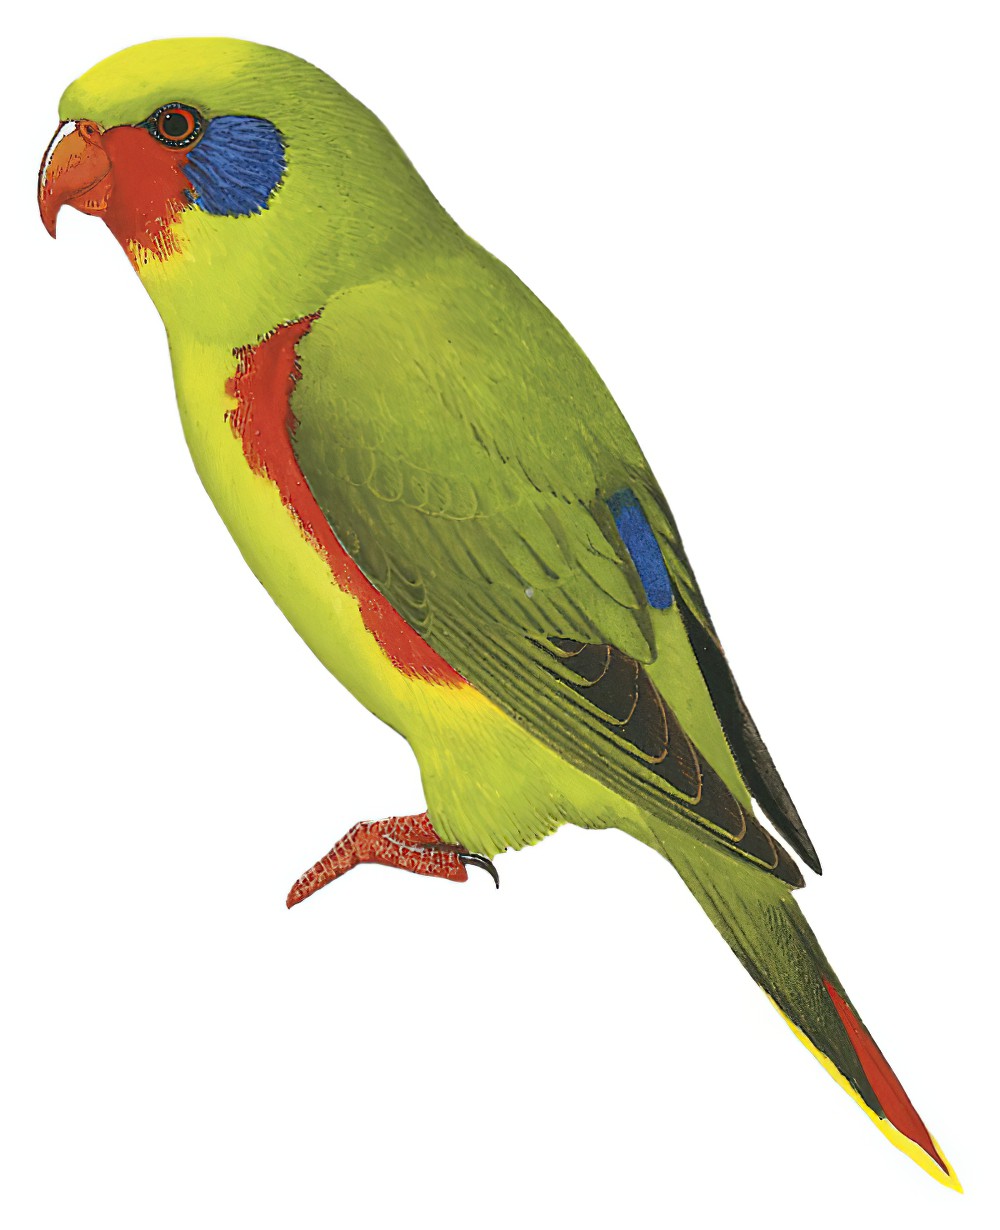 Red-flanked Lorikeet / Charmosyna placentis